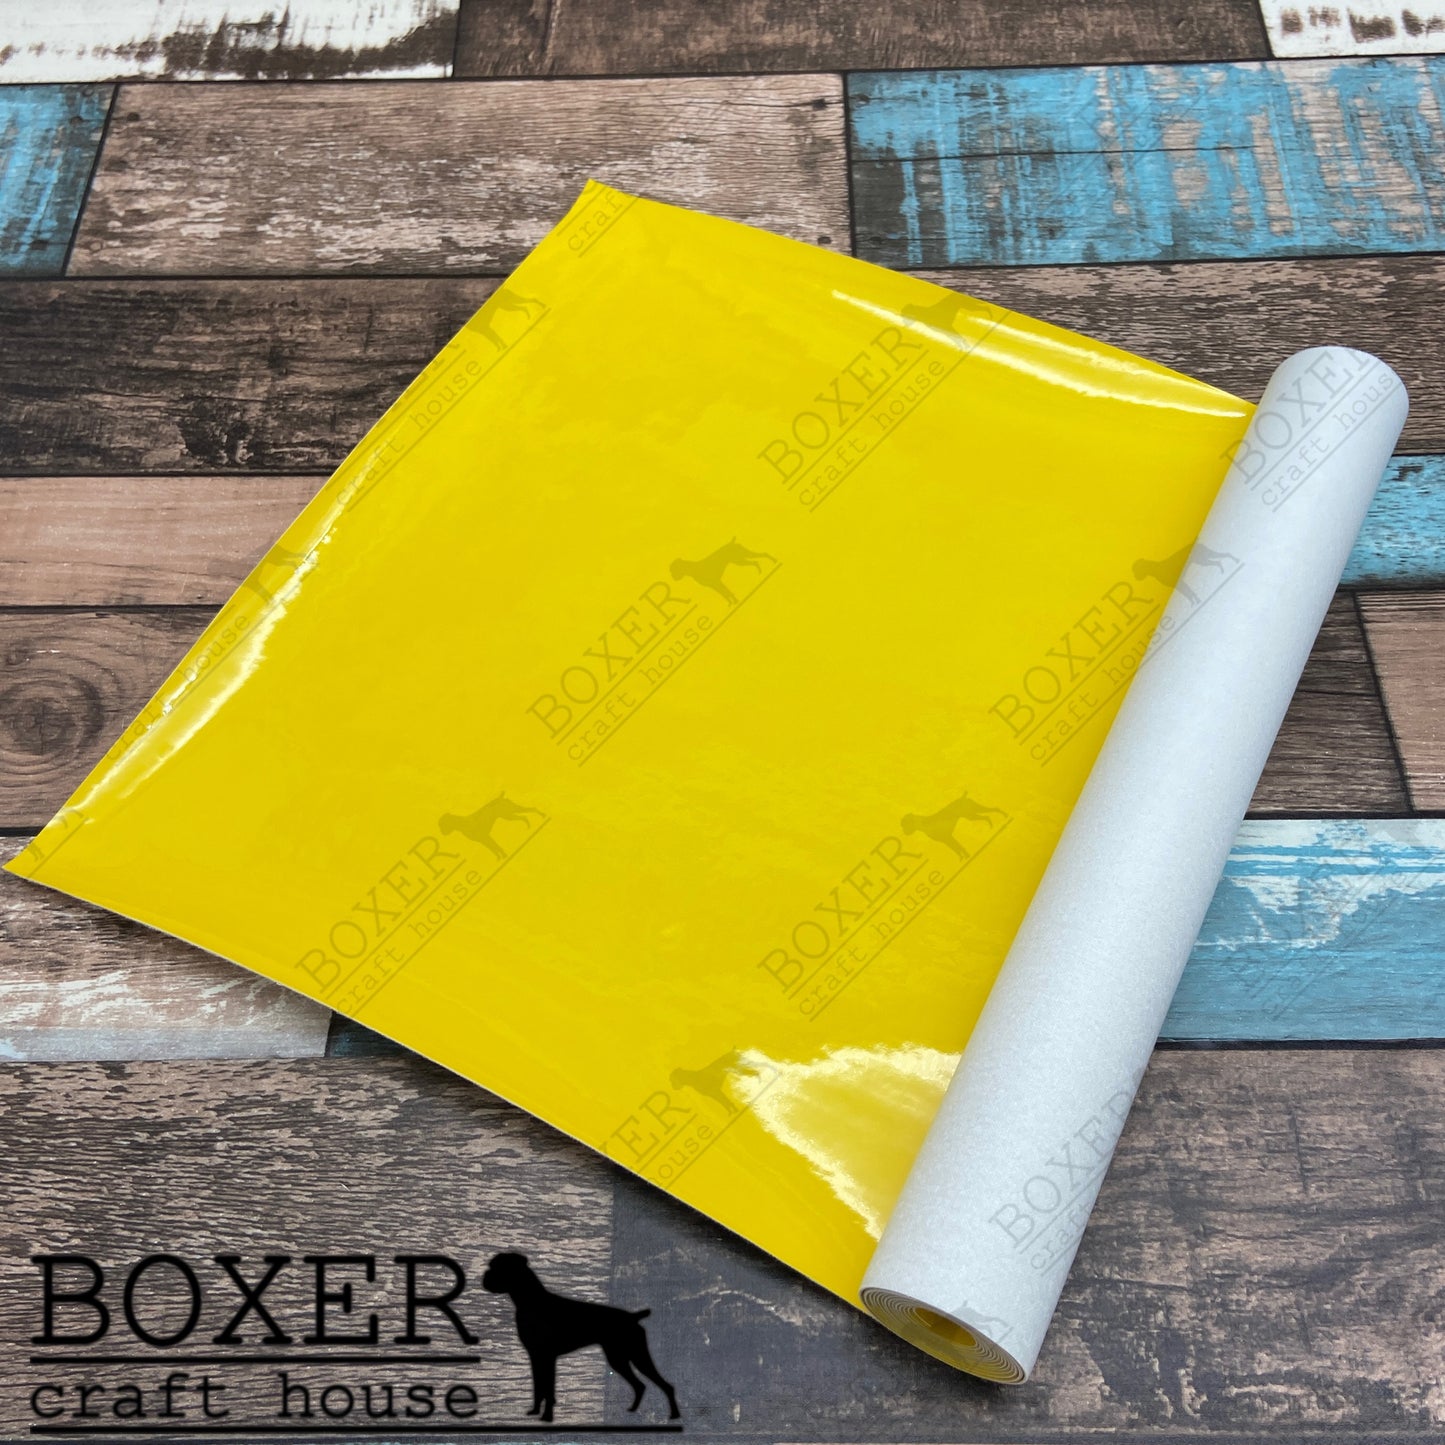 Wetlook Vinyl, Wetlook Faux Leather, Faux Leather, Shiny Vinyl, Sewing Vinyl, Wetlook, Yellow Wetlook, Boxer Craft House Faux Leather, Embroidery Vinyl,